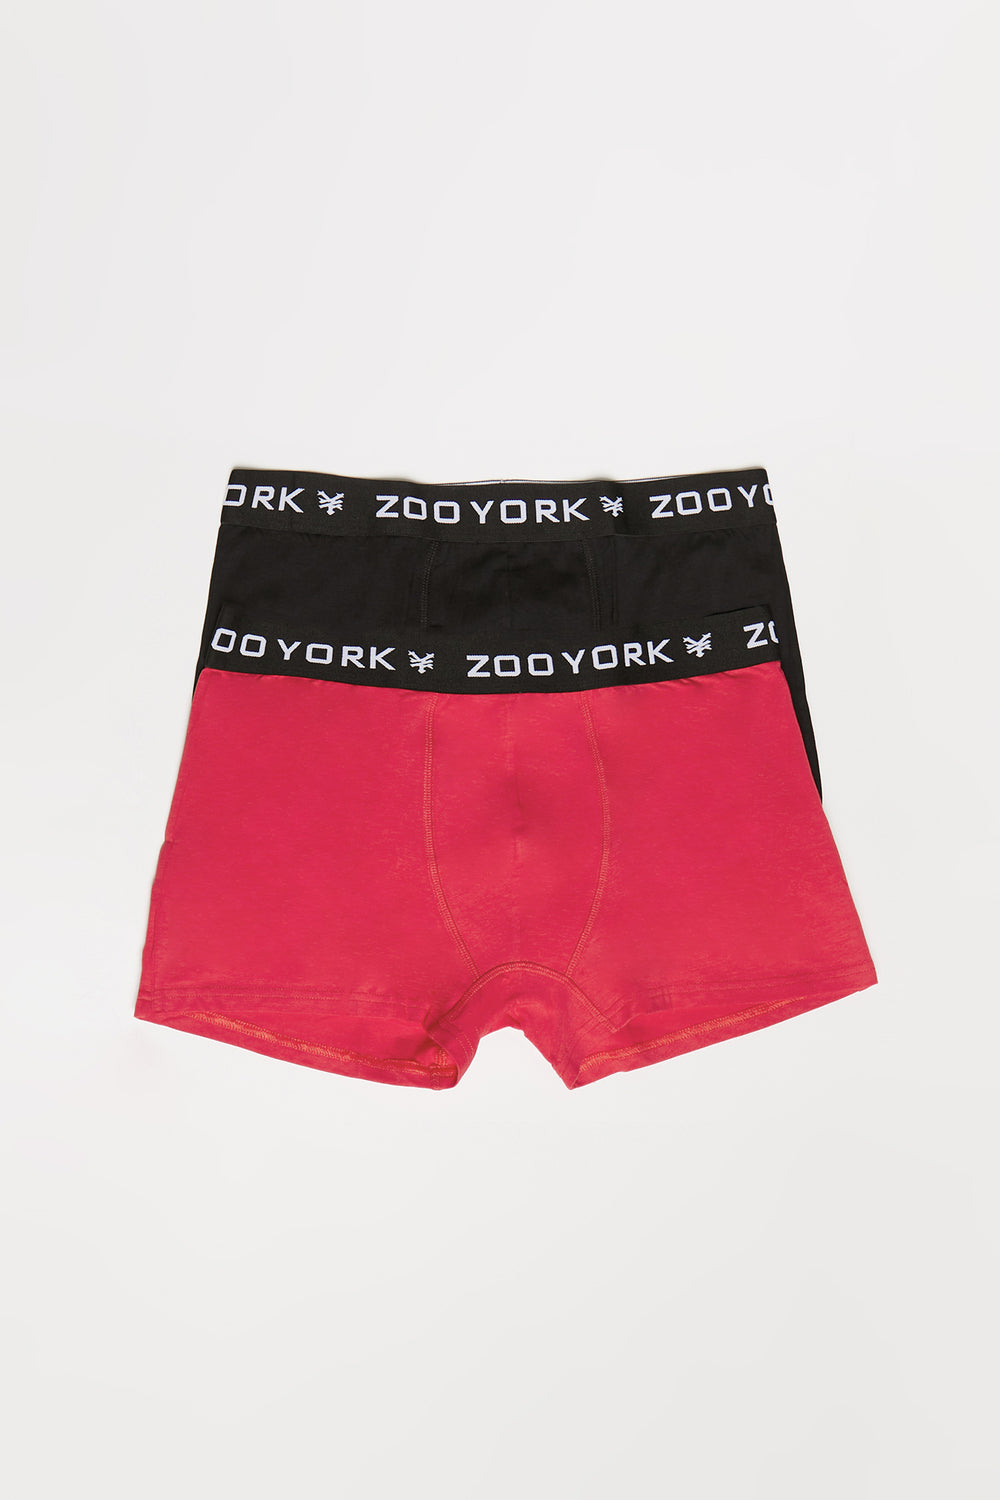 Zoo York Mens 2-Pack Boxer Briefs Pink